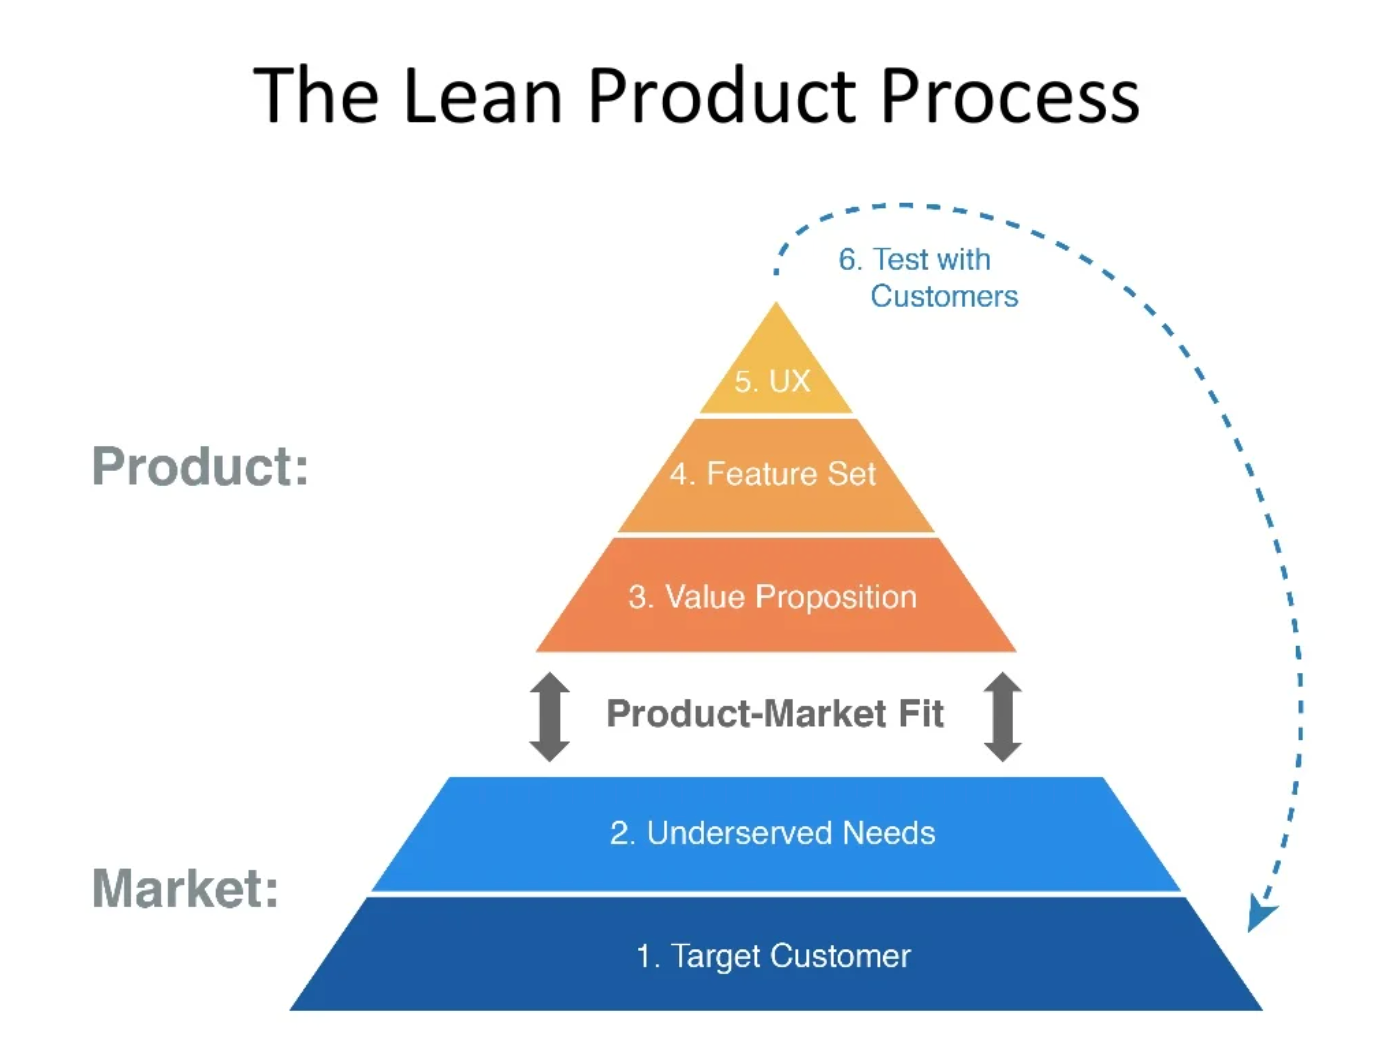 How to achieve Product-Market Fit by Dan Olsen